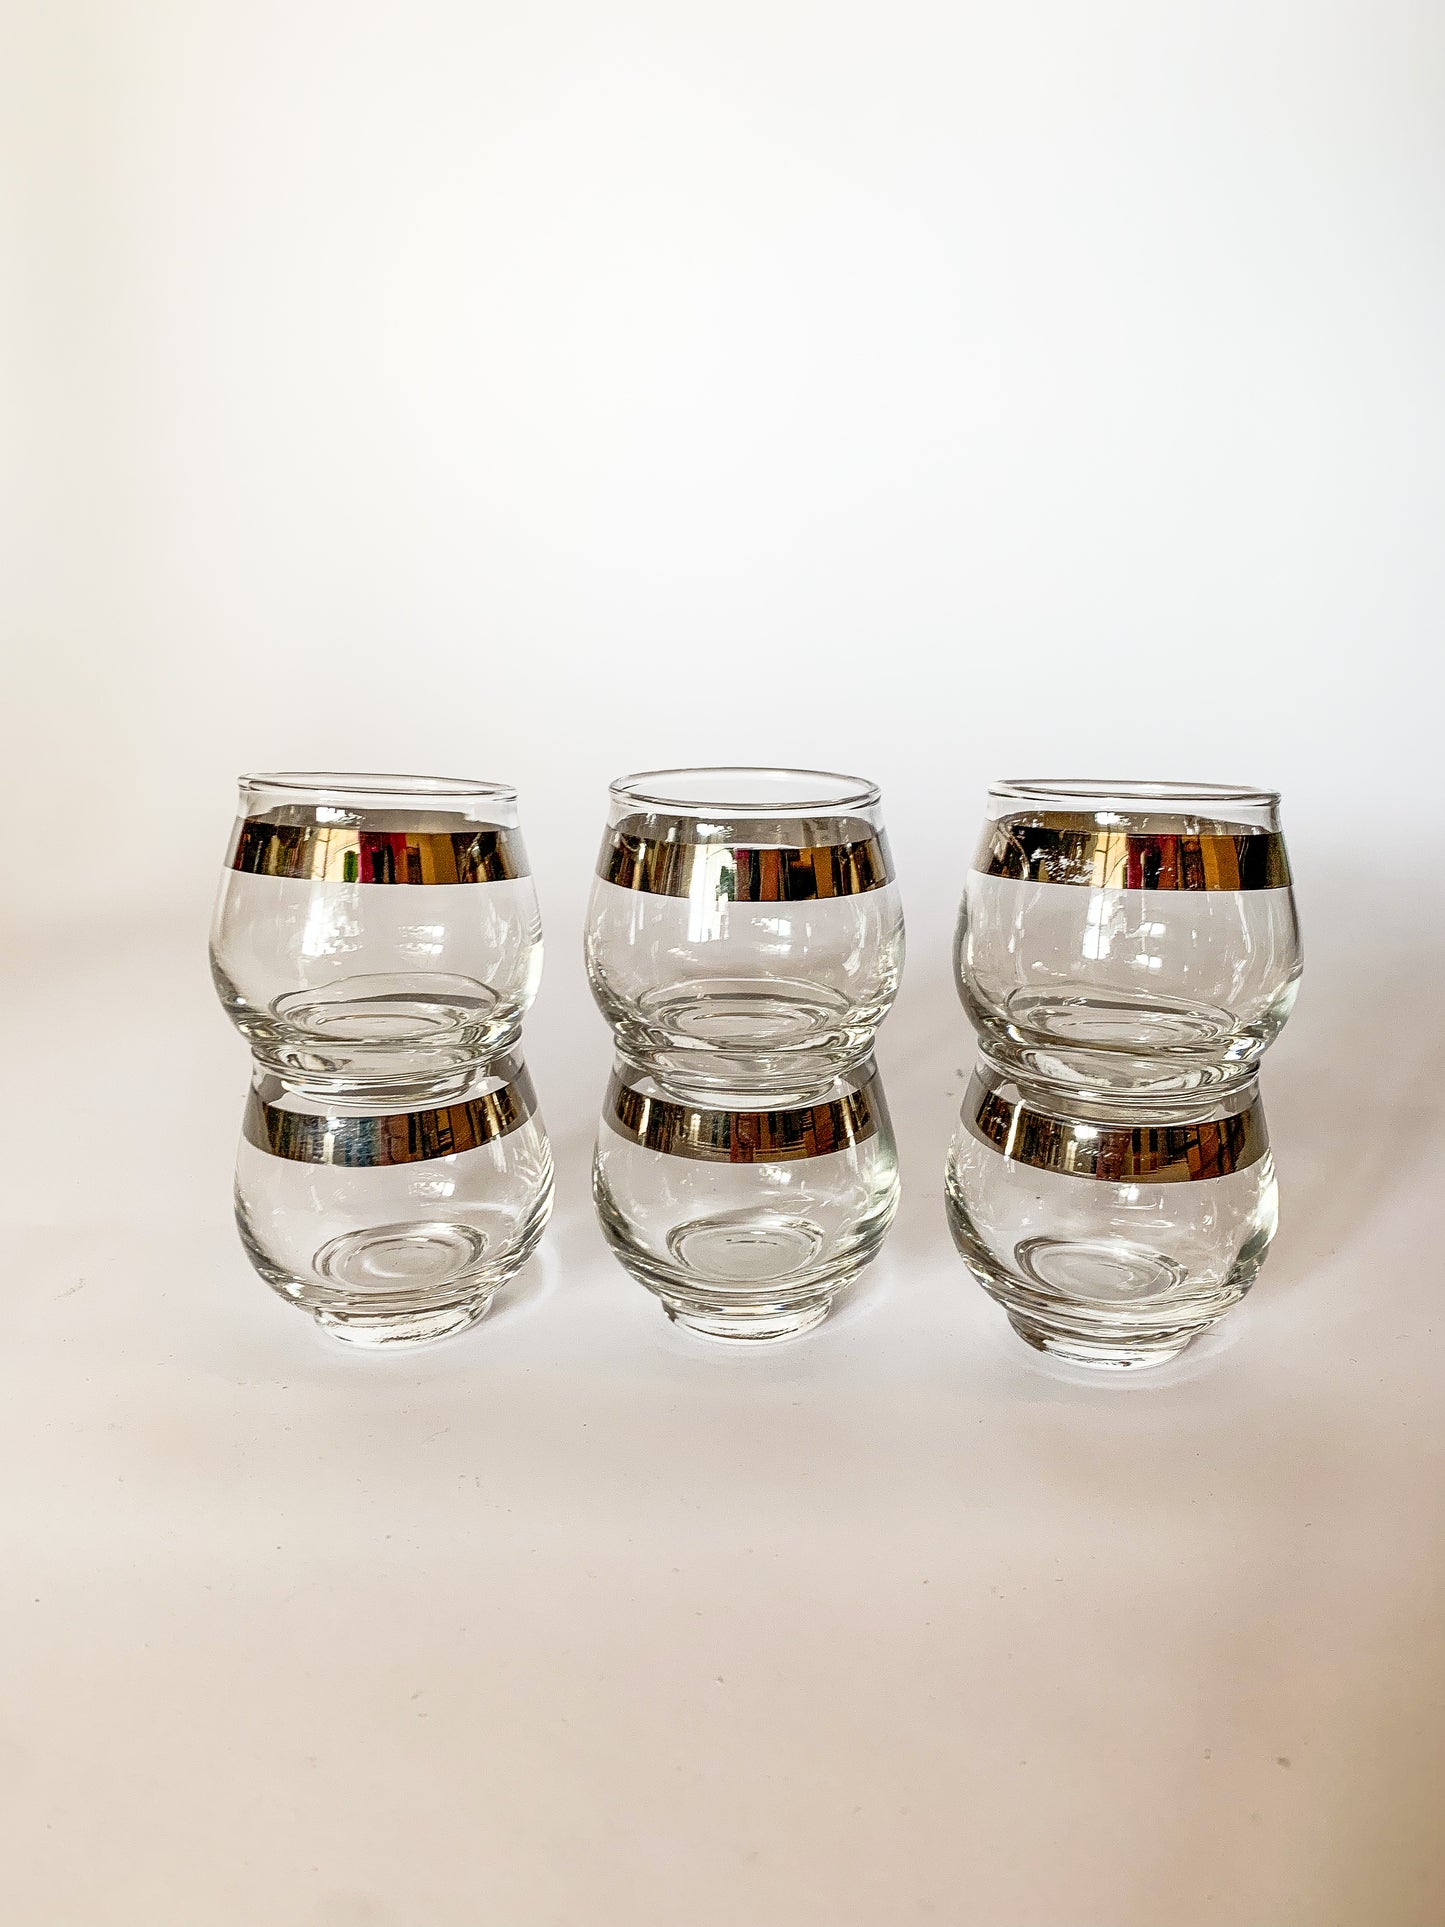 1960s Midcentury Libbey Glass Co Silver Banded roly poly cocktail glasses